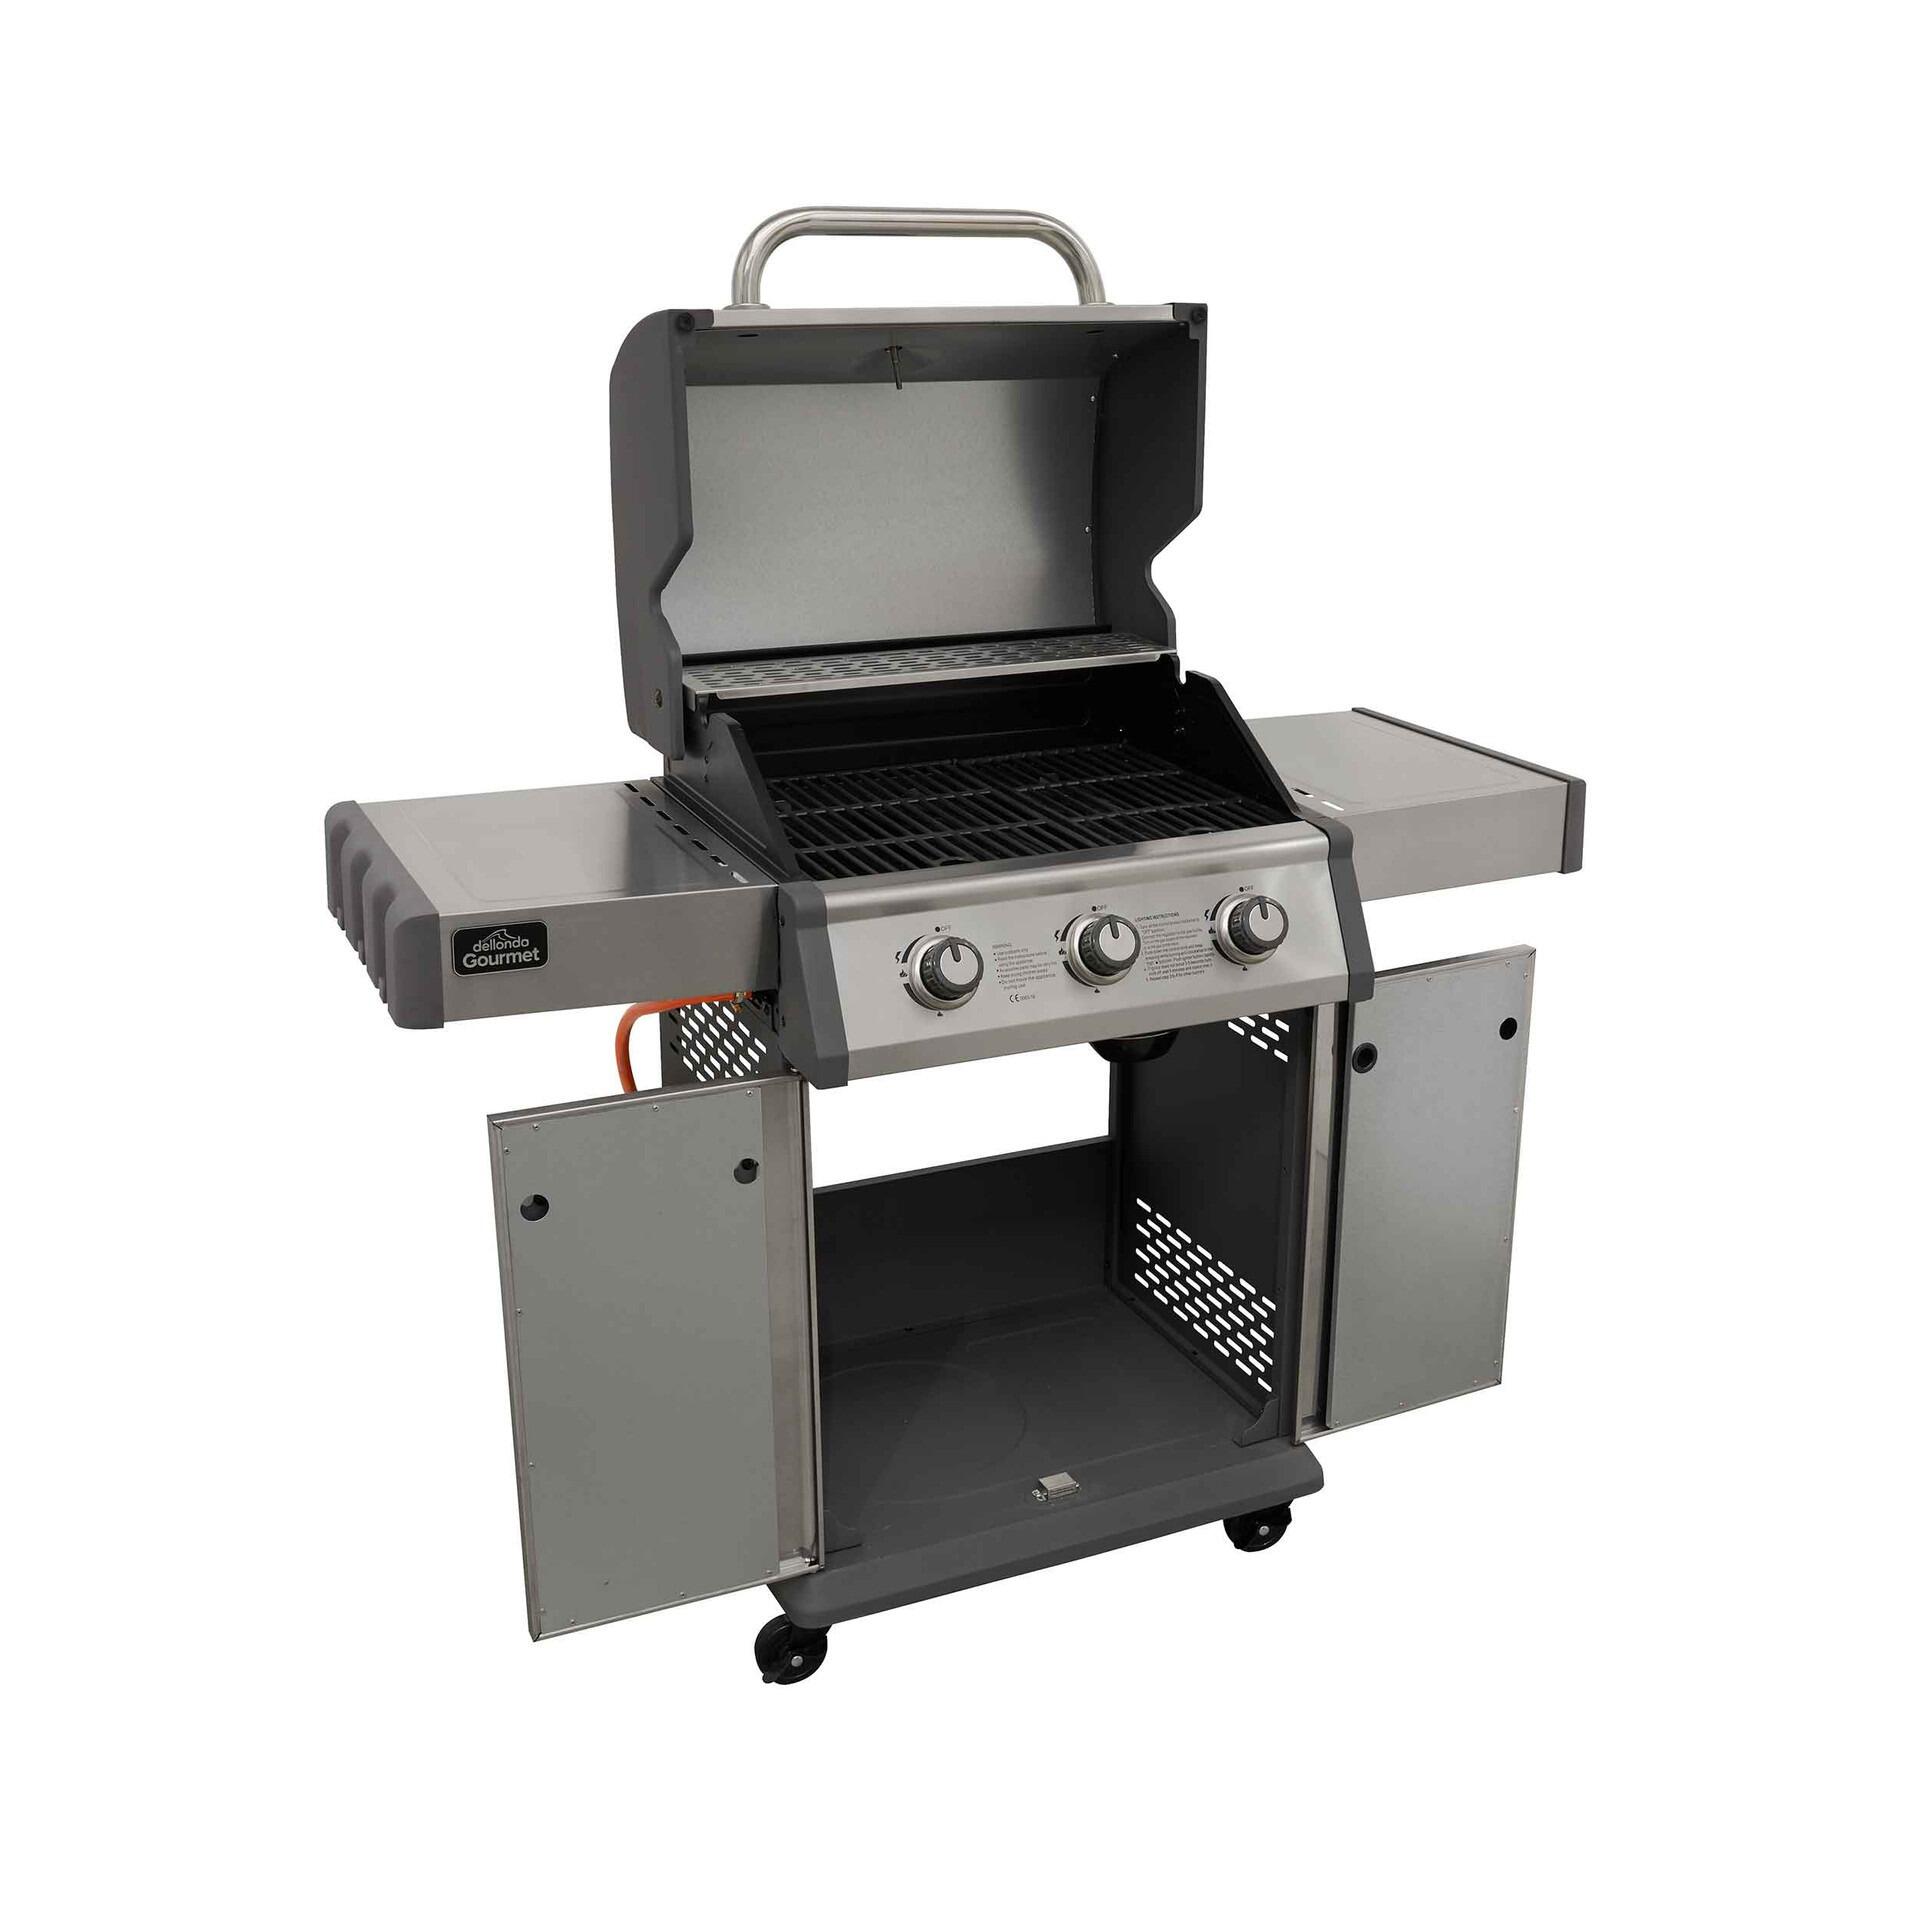 4+1 Burner Deluxe Gas BBQ with Piezo Ignition, Stainless Steel - DG17 -  Dellonda